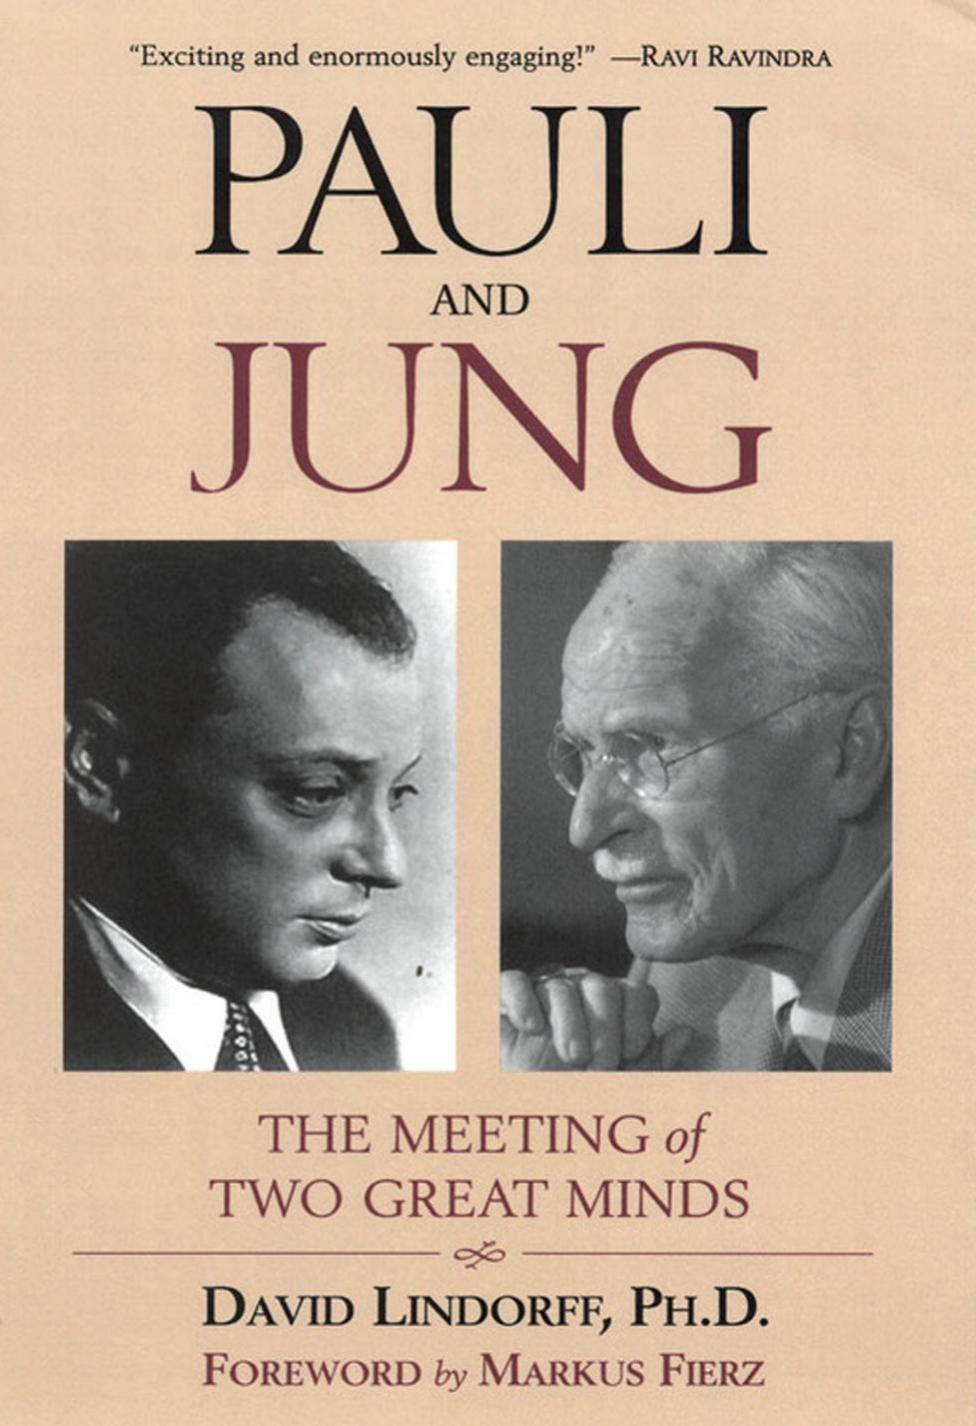 Pauli and Jung: The Meeting of Two Great Minds